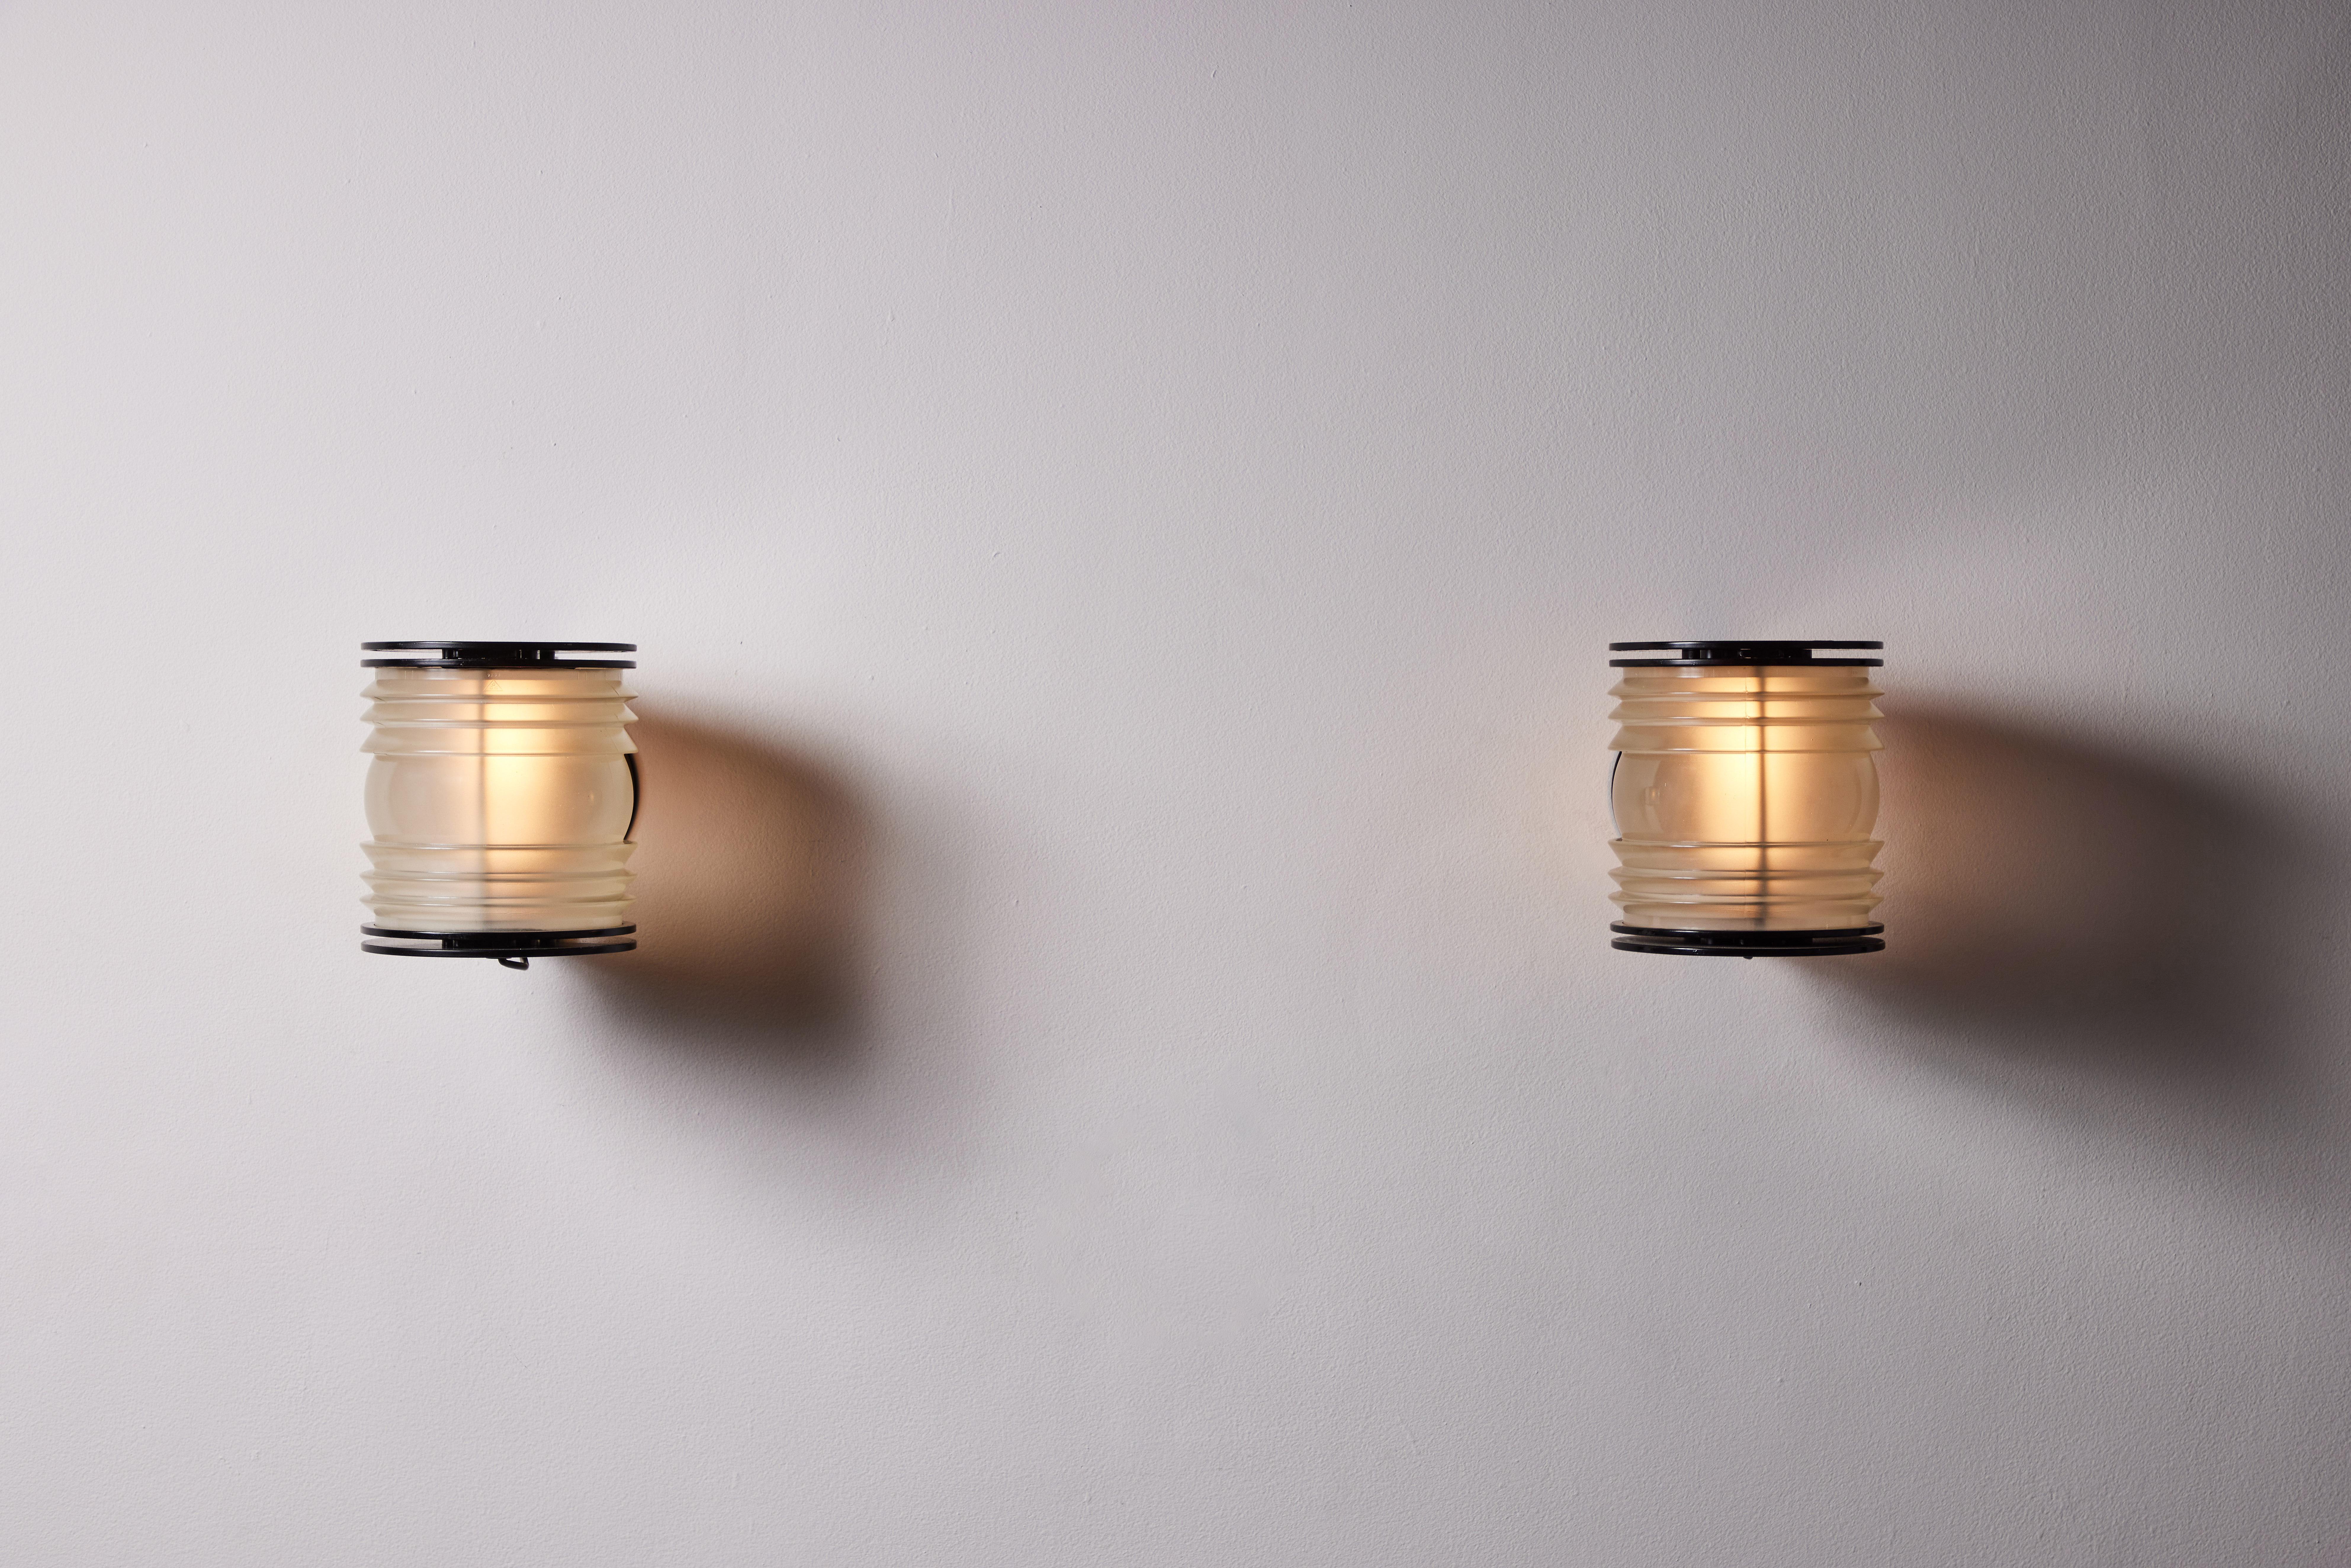 Pair of Model 1139 Fresnel sconces by Joe Colombo for Oluce. Designed and manufactured in Italy, circa 1960s. Fresnel glass, enameled metal. Rewired for U.S. standards. We recommend one E27 60w maximum bulb. Bulbs provided as a one time courtesy.